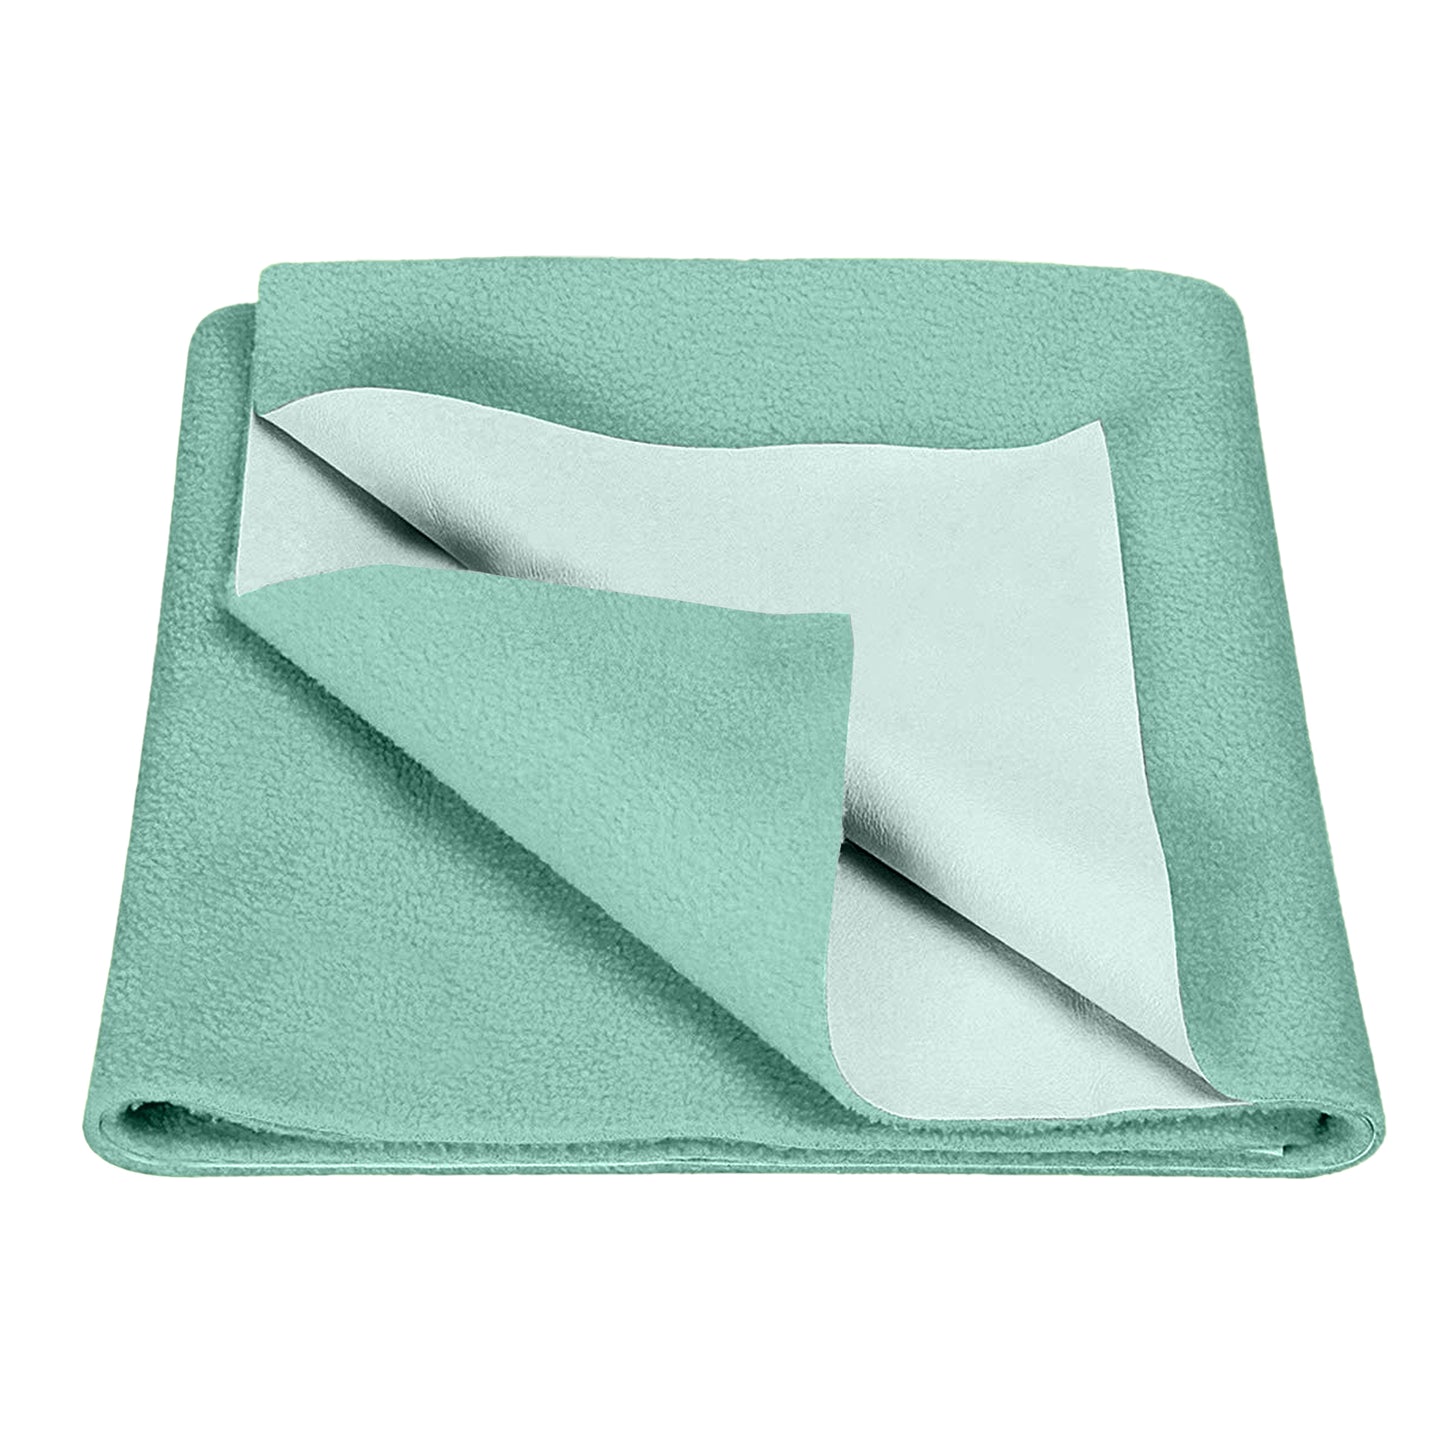 Waterproof Bed Protector, Quick Dry Sheet, Baby Bed Protector (70 X 100 CM), Pack of 1 -SEA GREEN